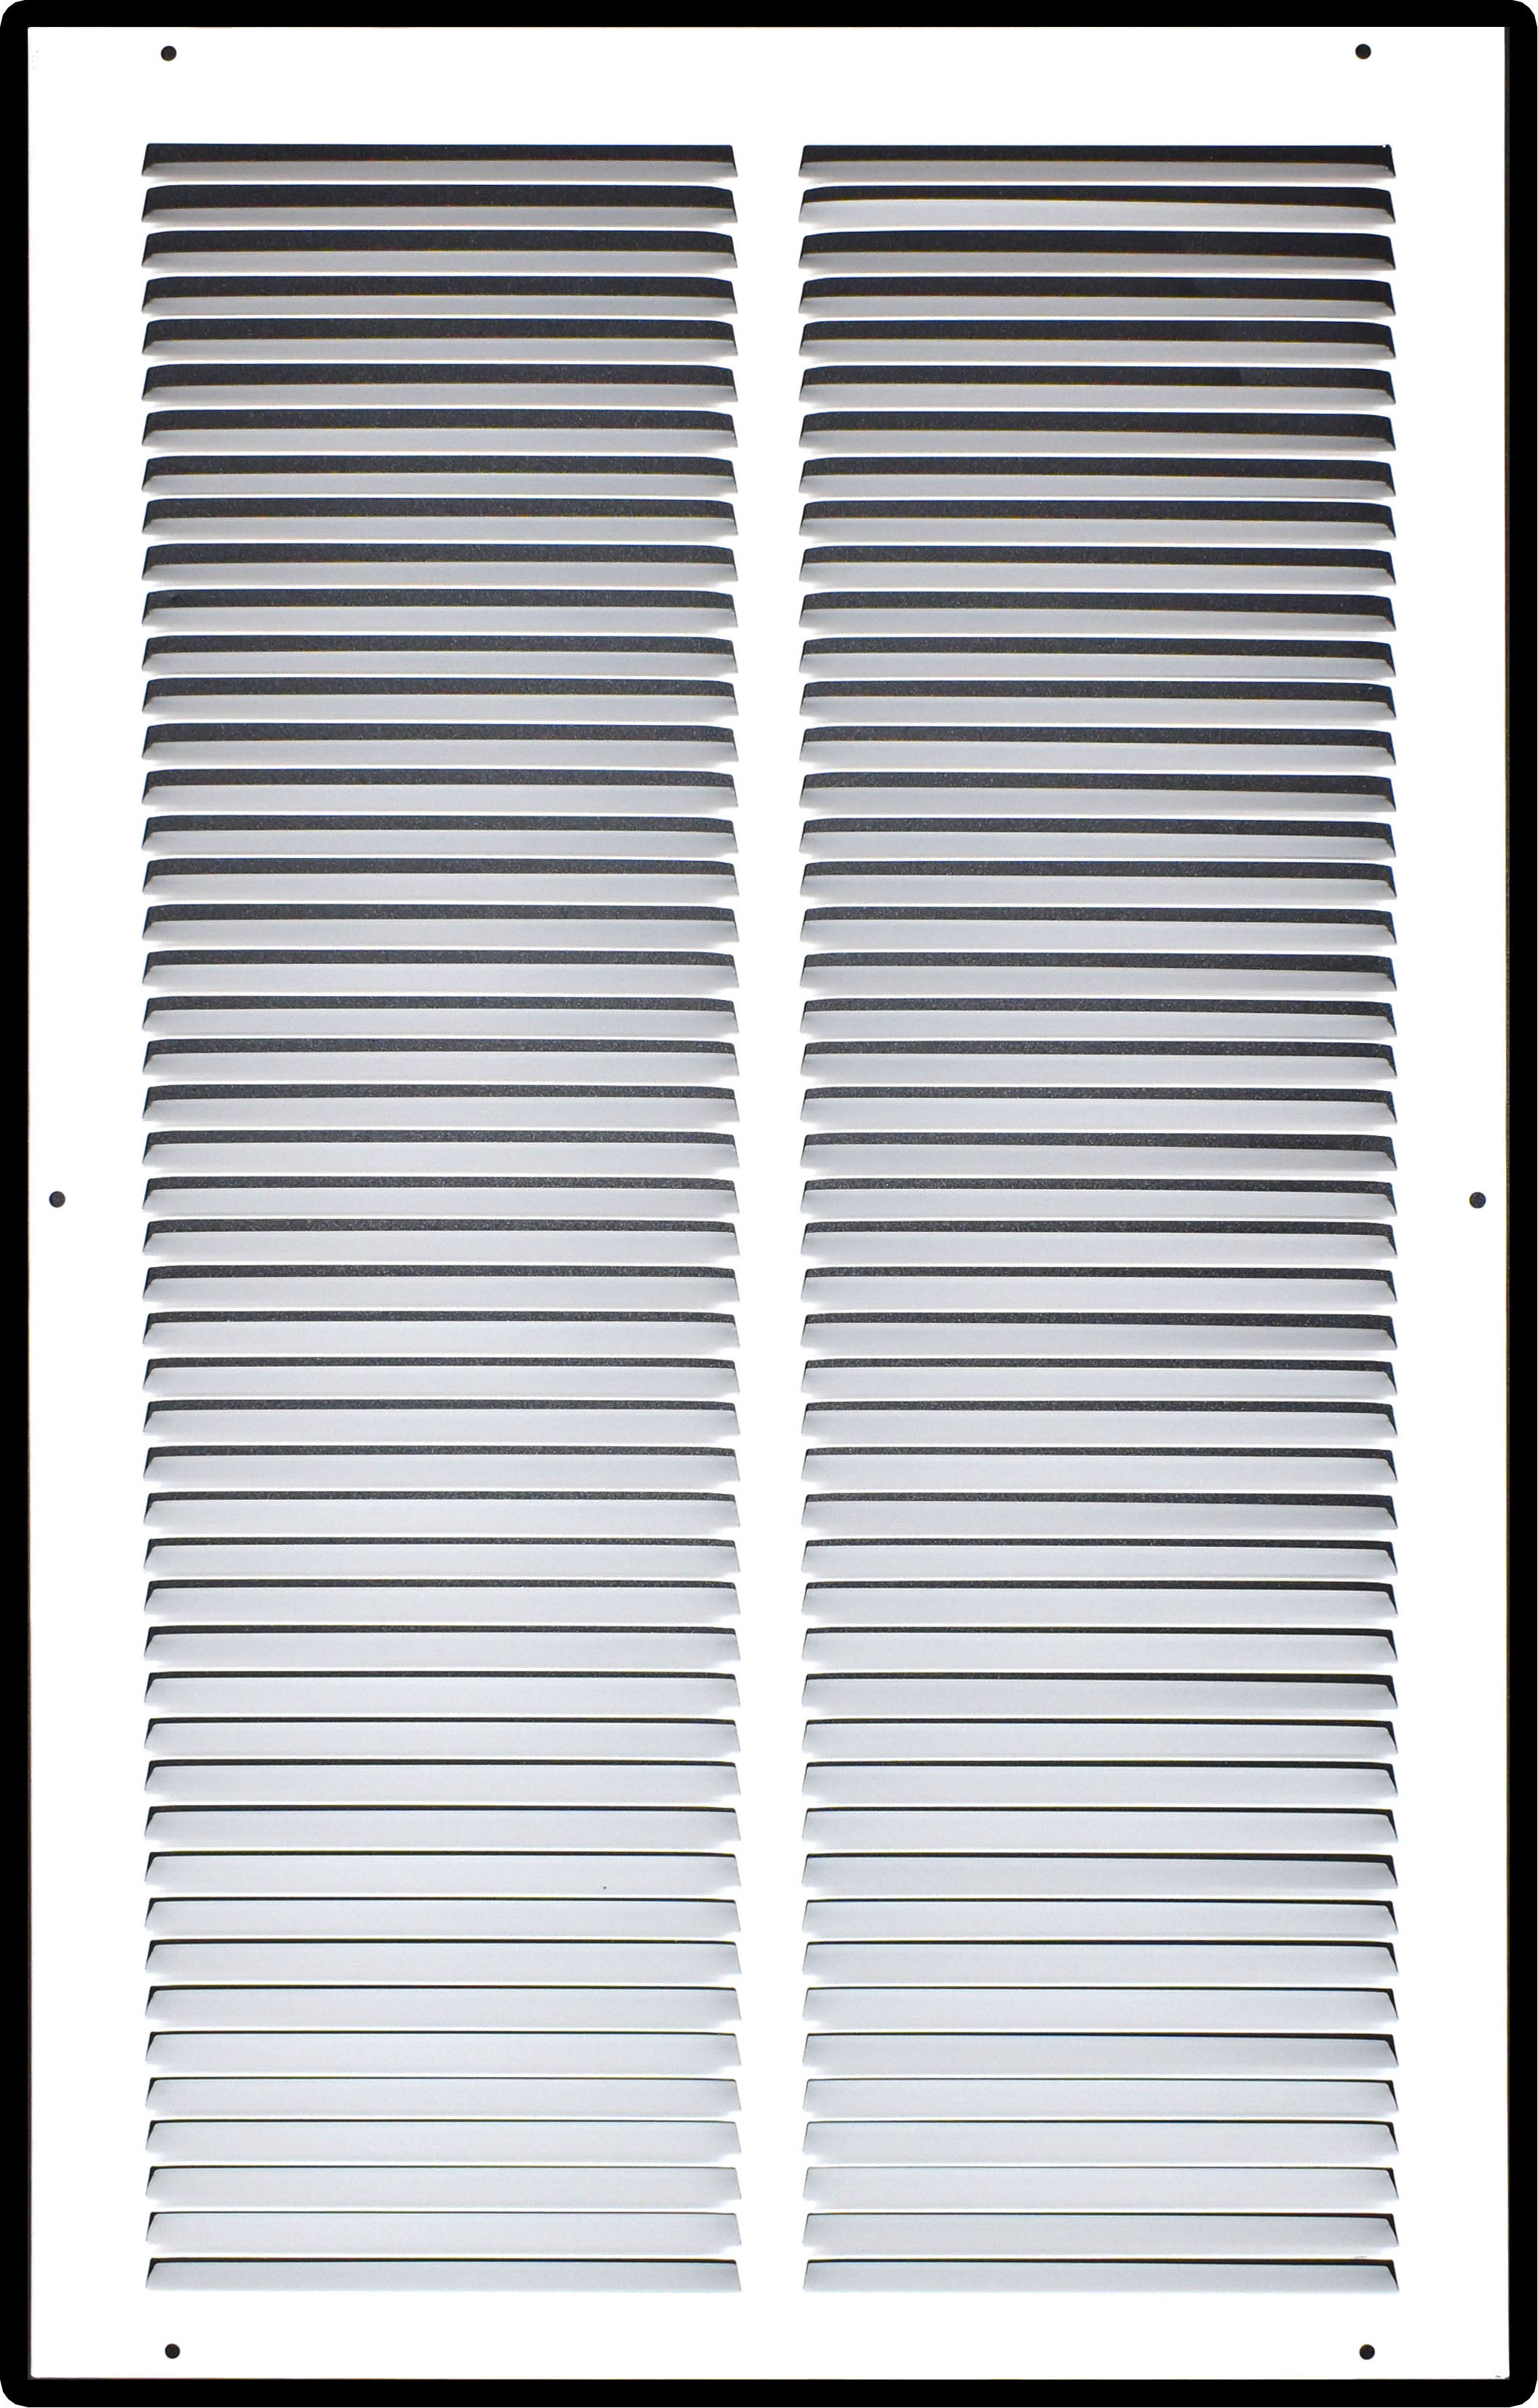 14" X 24" Duct Opening | Steel Return Air Grille for Sidewall and Ceiling | Outer Dimensions: 15.75"W X 25.75"H